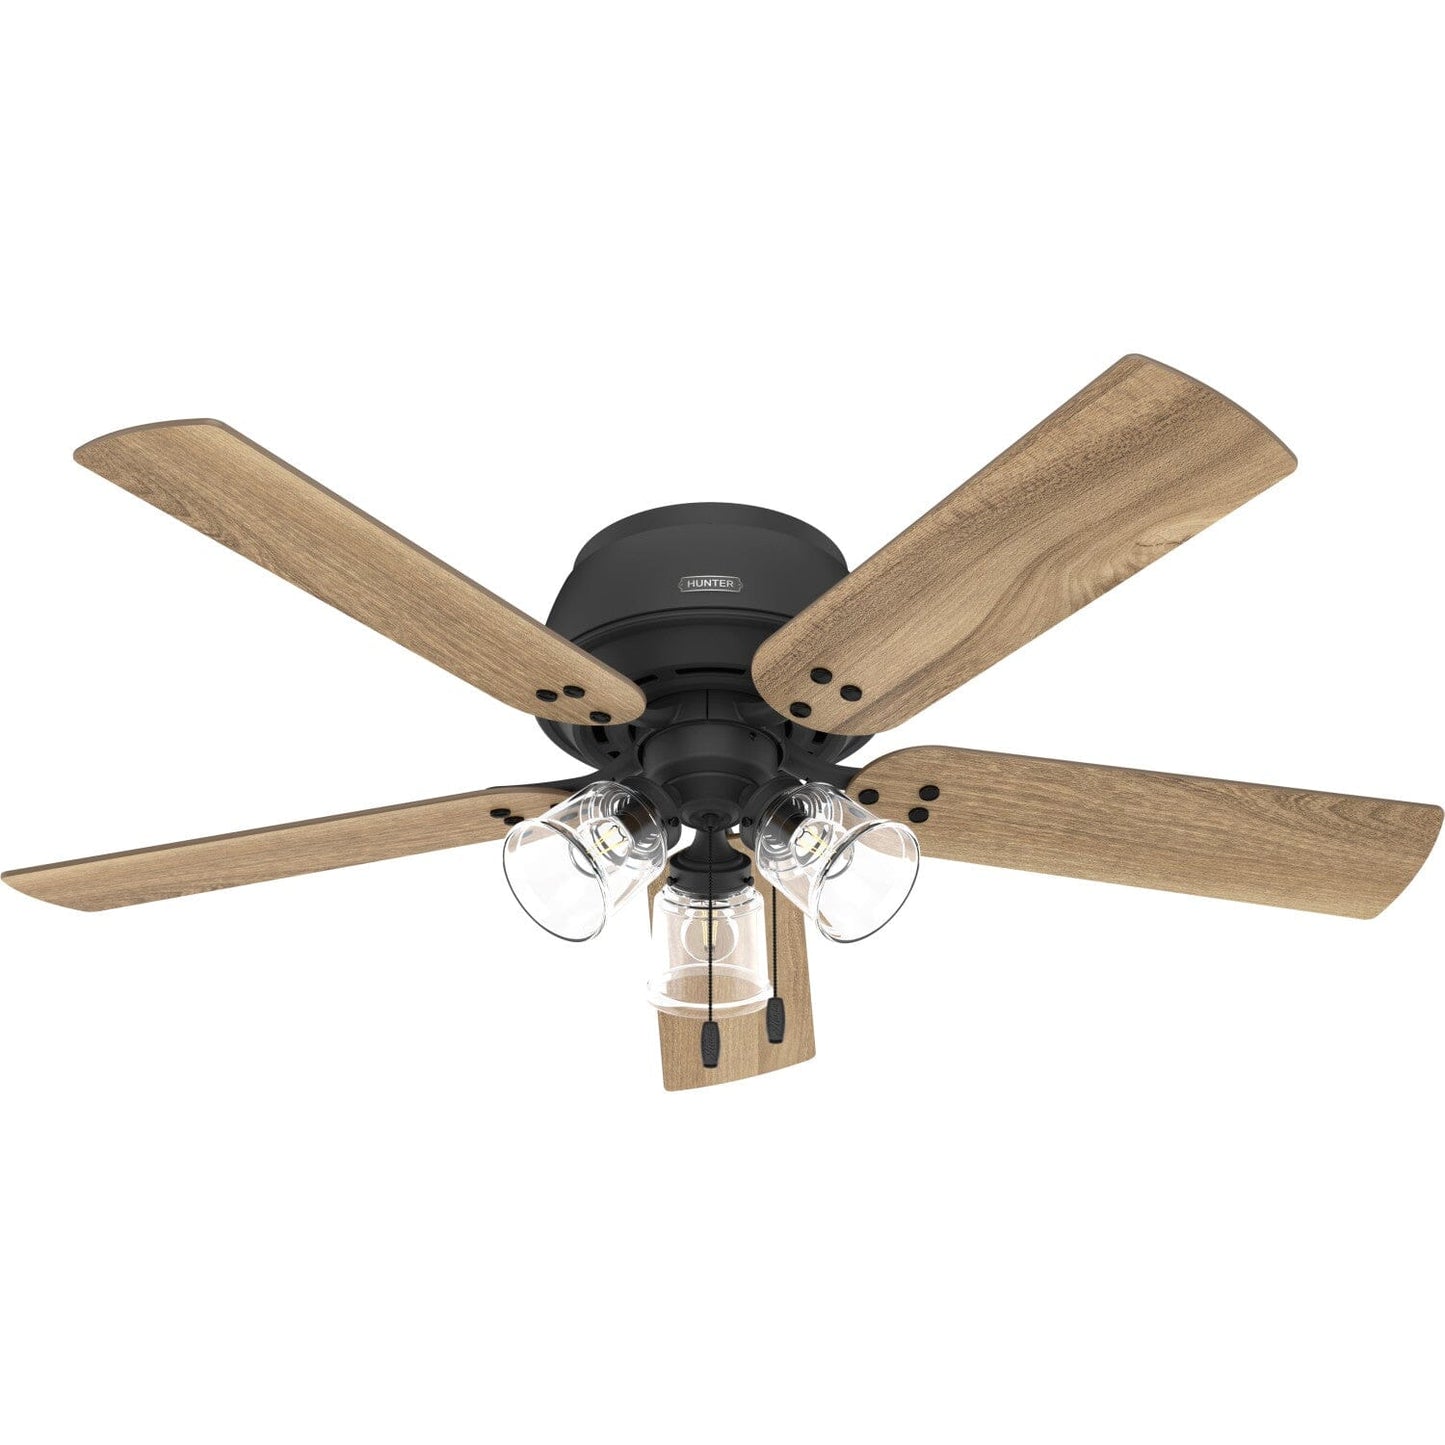 Shady Grove Low Profile with 3 Lights 52 inch Ceiling Fans Hunter Matte Black - Golden Maple 